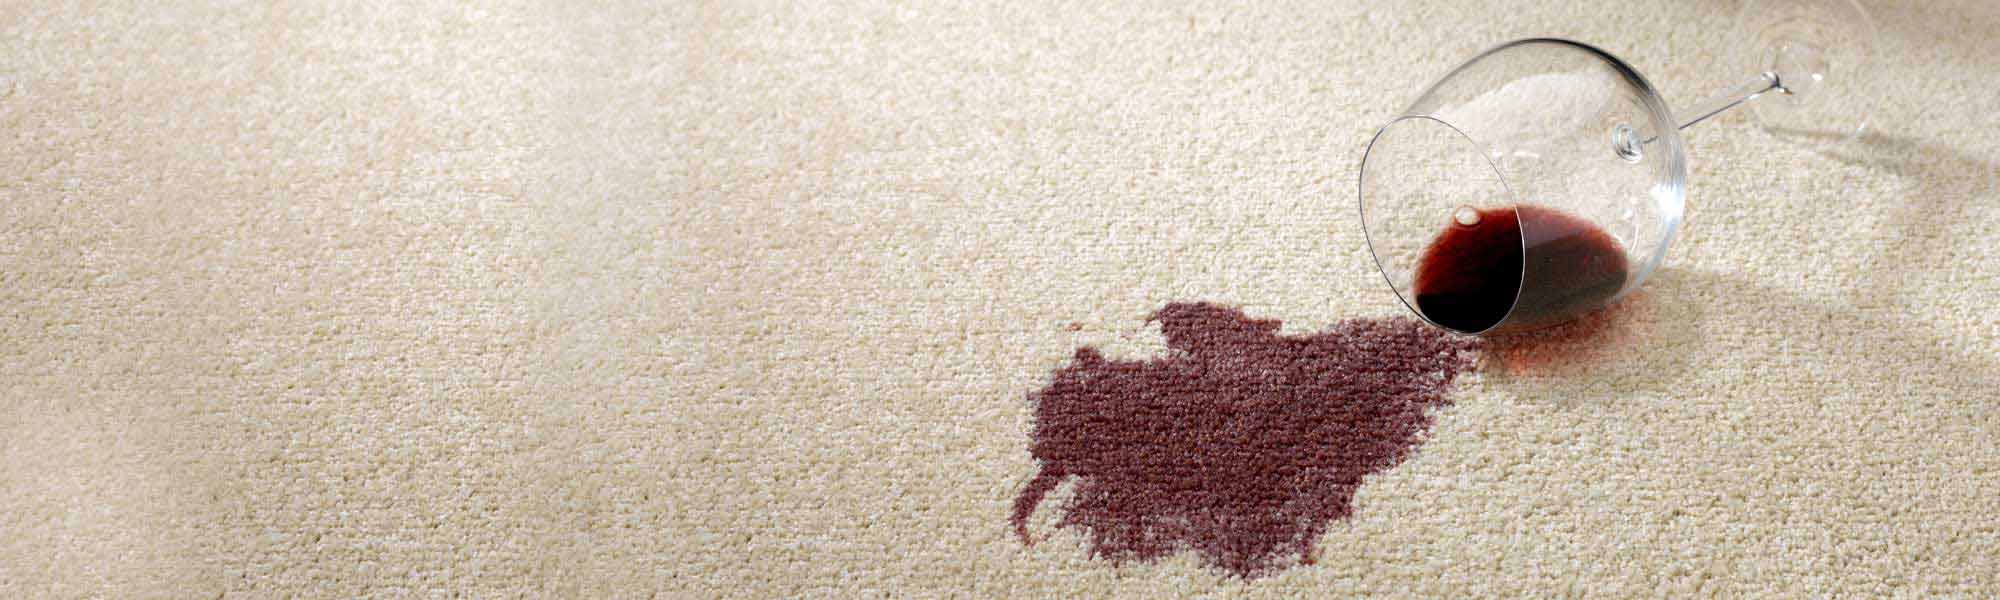 Professional Stain Removal Service by Chem-Dry of New Port Richey